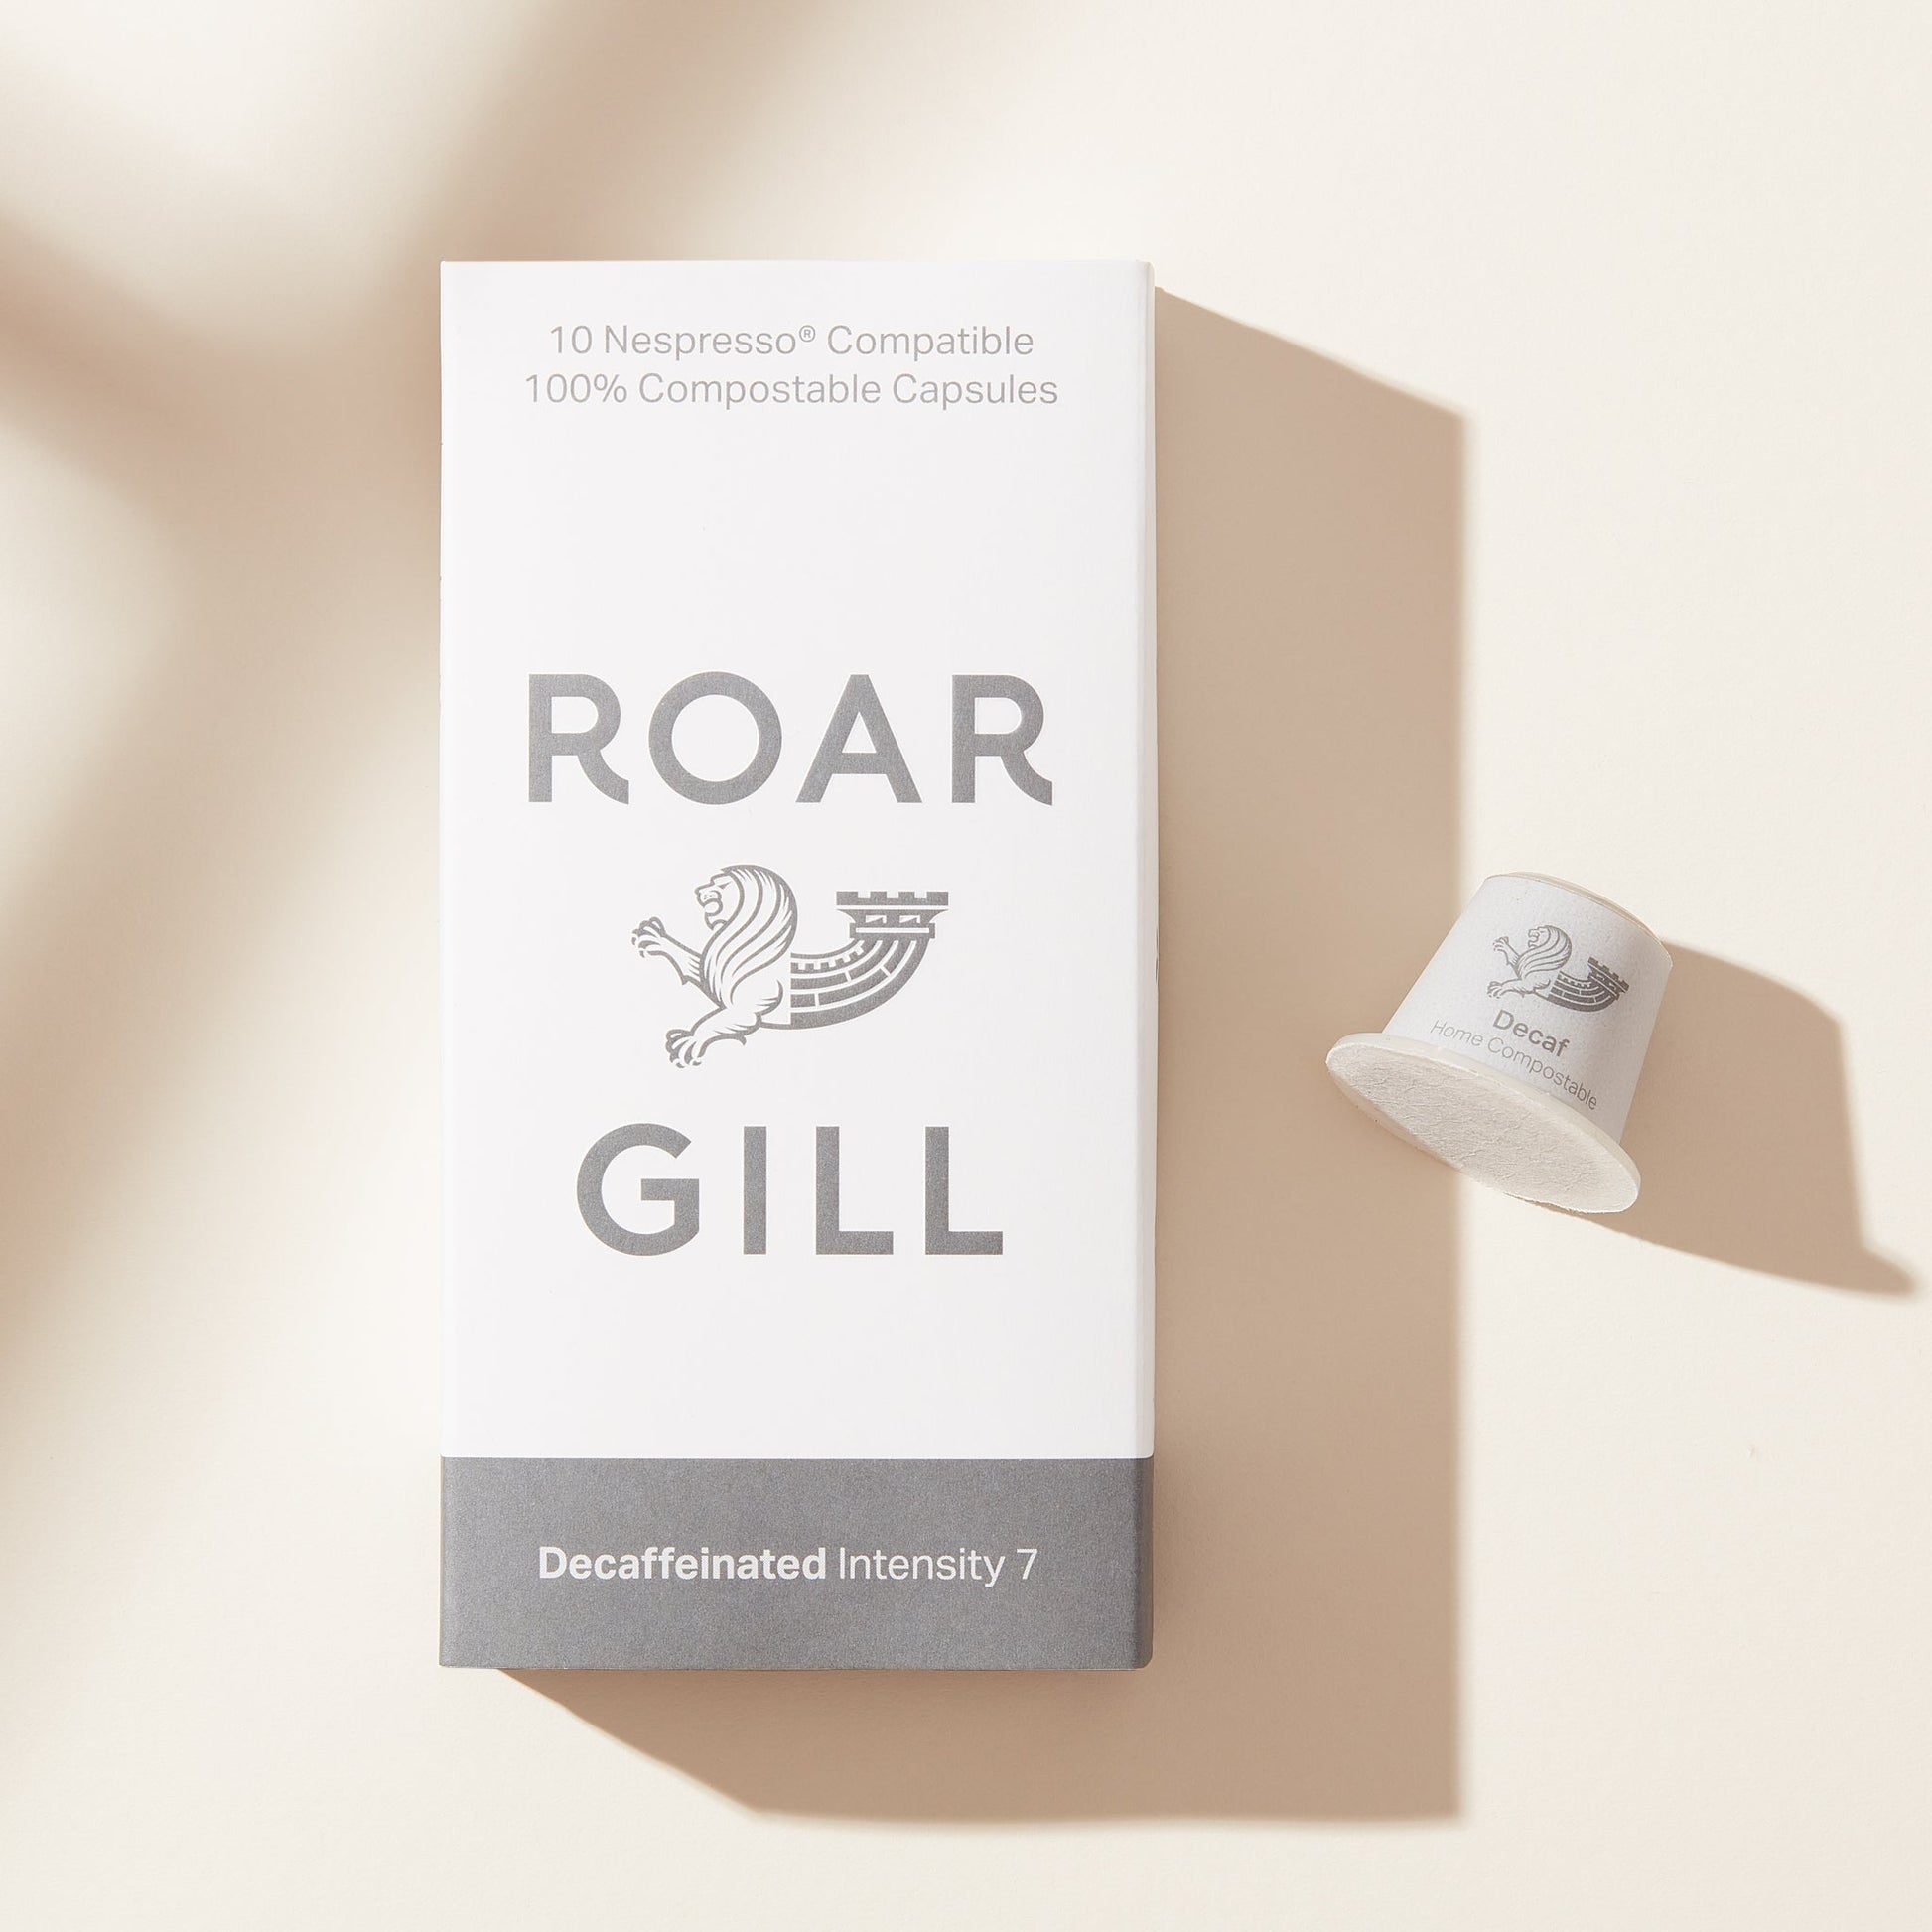 Roar Gill Swiss Water Decaf. Home compostable coffee pod.